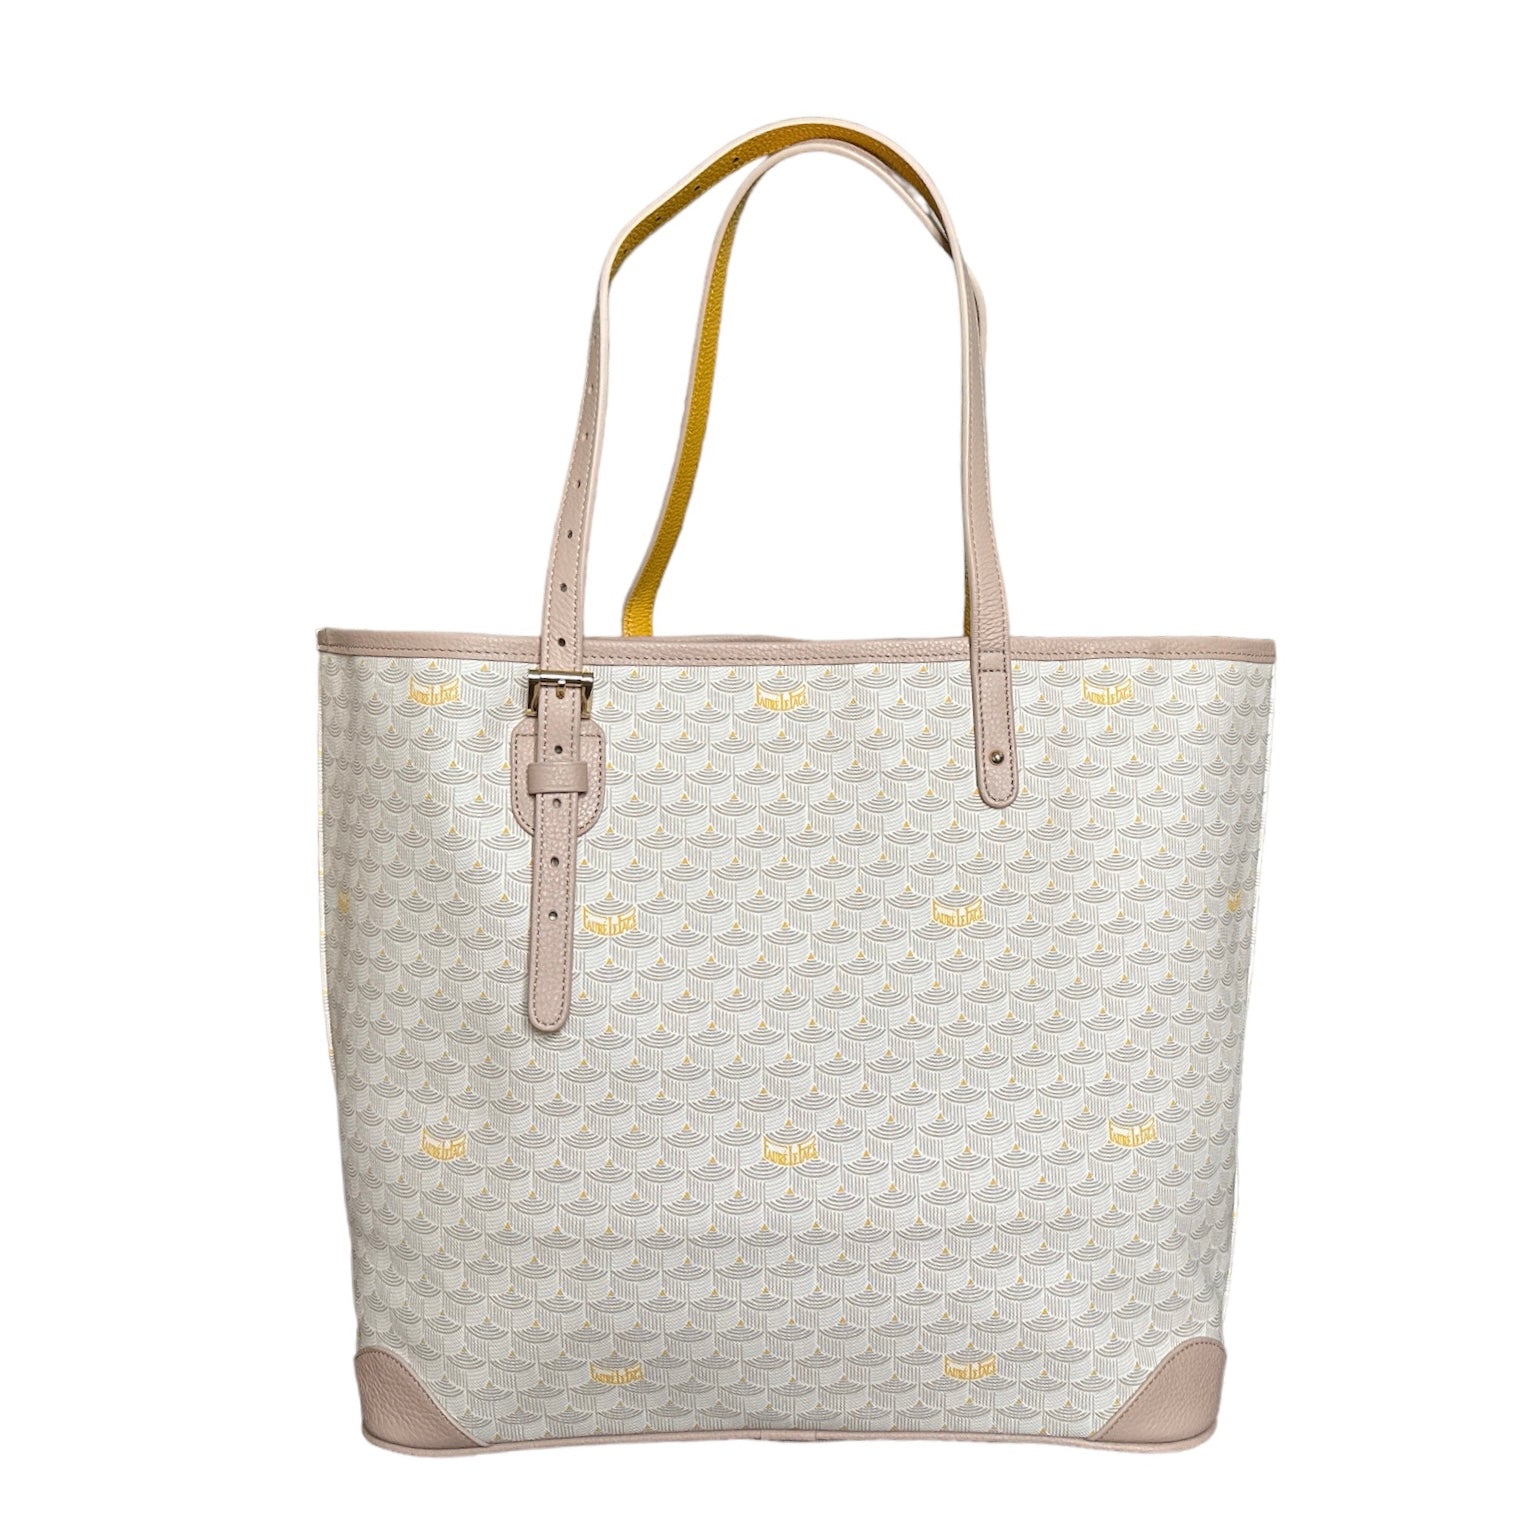 Faure Le Page Daily Battle 27 Tote Bag, Women's Fashion, Bags & Wallets,  Tote Bags on Carousell